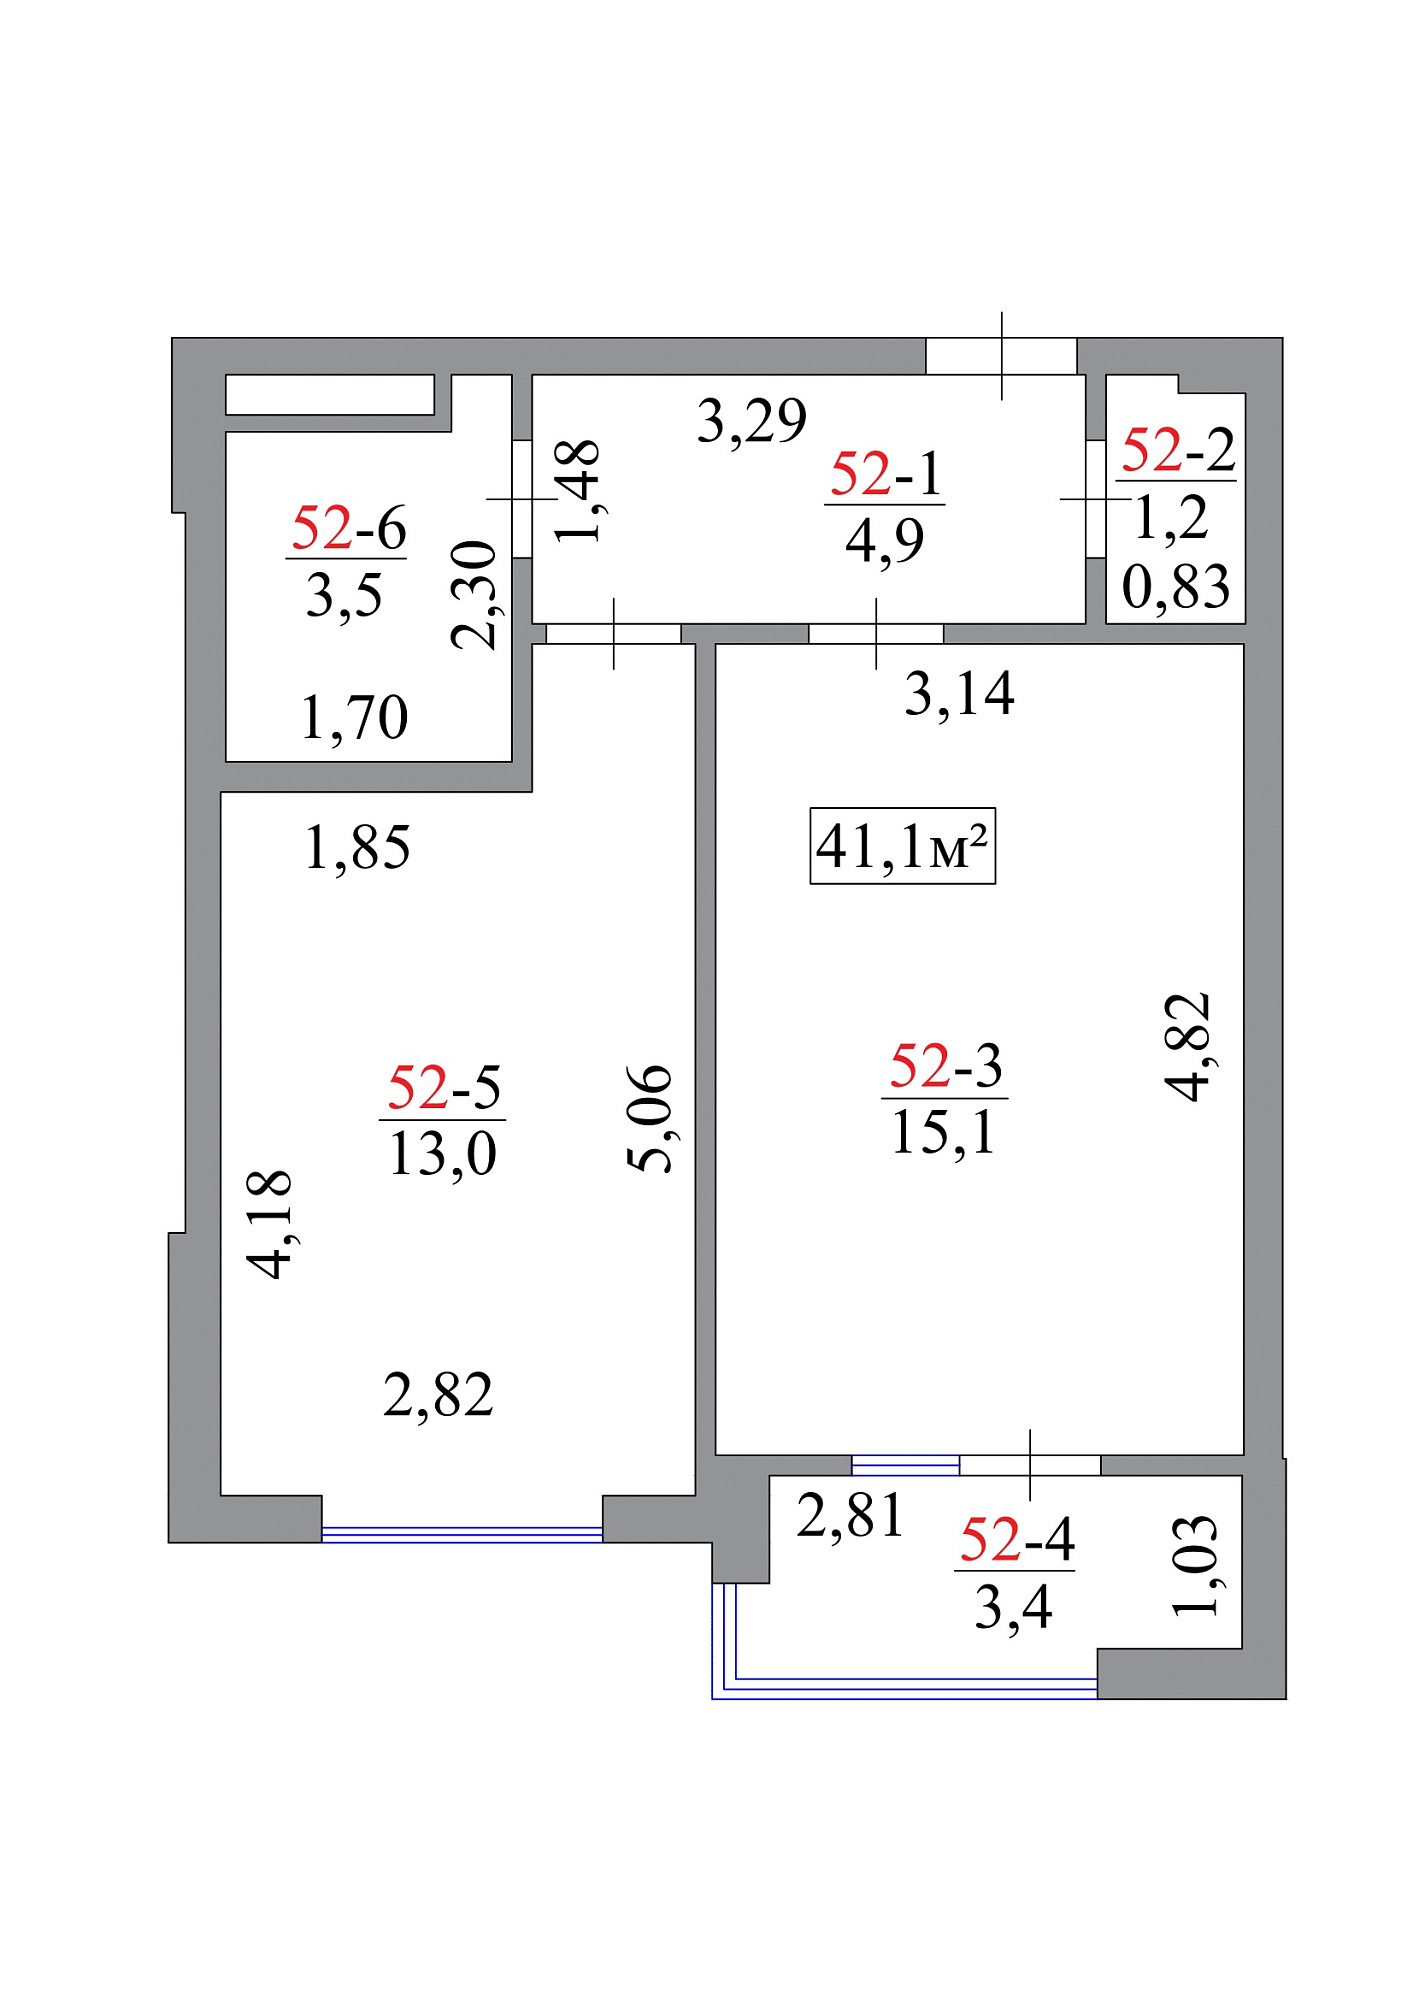 Planning 1-rm flats area 41.1m2, AB-07-06/00047.